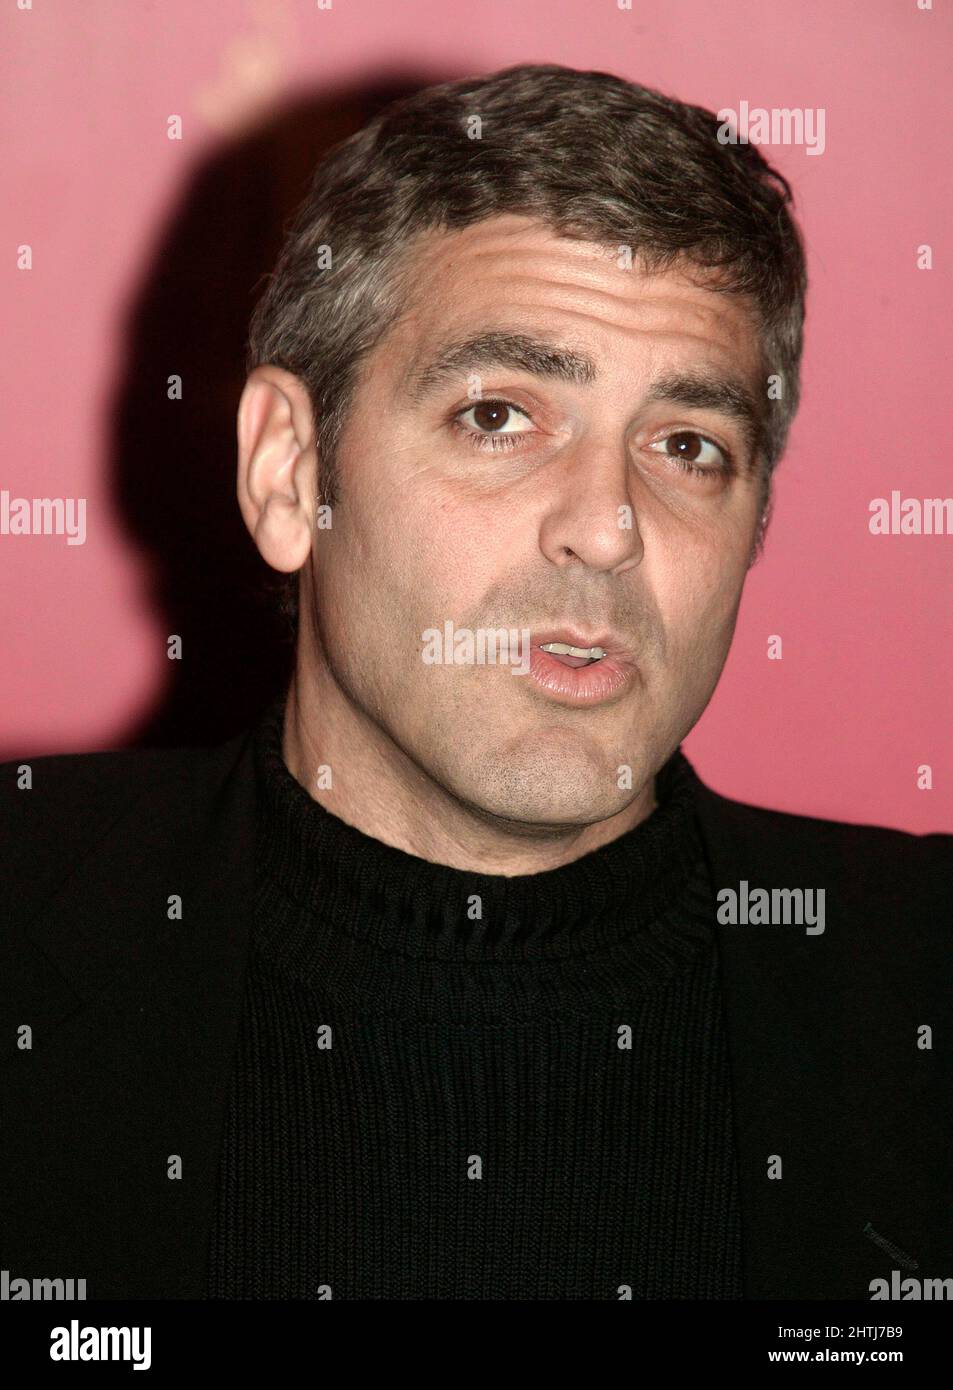 GEORGE CLOONEY AT THE BERLIN FILM FESTIVAL 8TH FEBRUARY 2003 PROMOTING HIS FILM SOLARIS Stock Photo